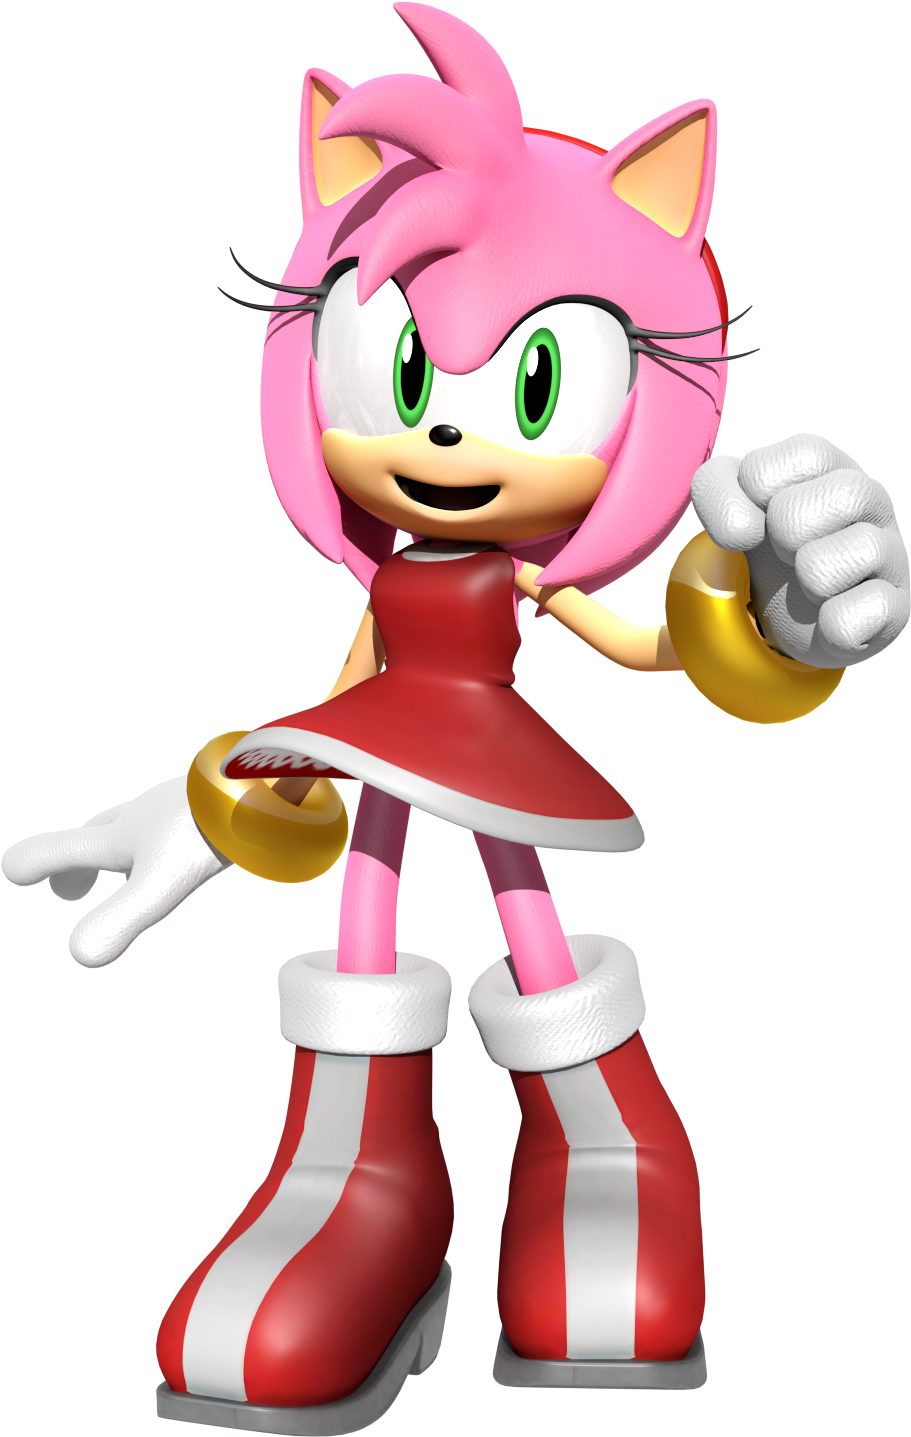 Amy Rose Render By Jaysonjeanchannel - Amy Rose Render (926x1440)